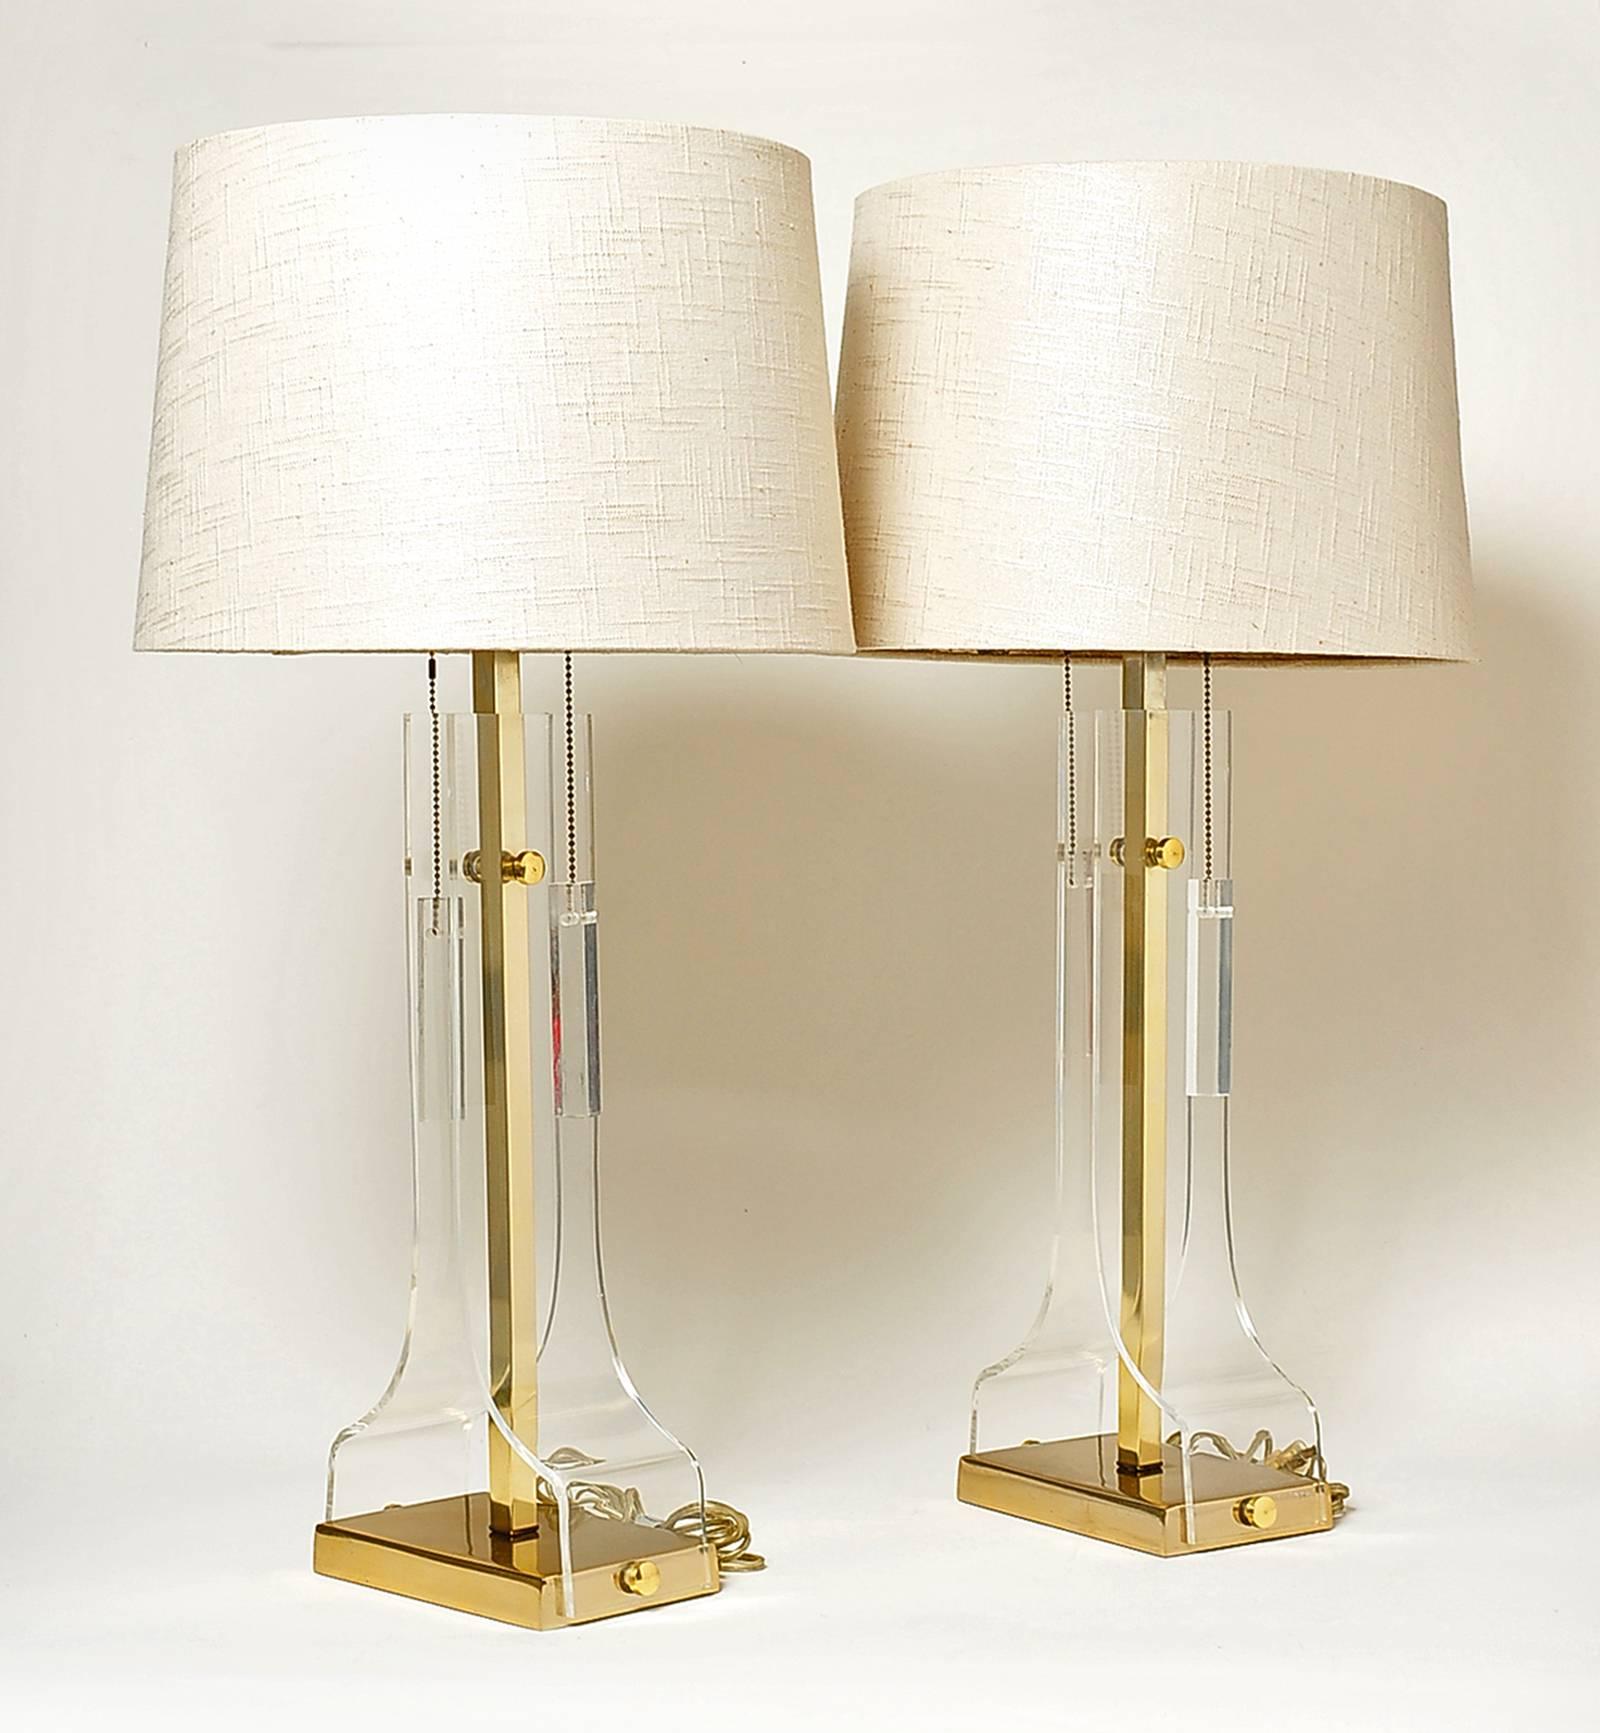 Pair of Laurel Lucite and brass table lamps, circa 1970s. Lucite and brass in very nice condition, only minor scuffs to both. Newer wiring, shades not included.